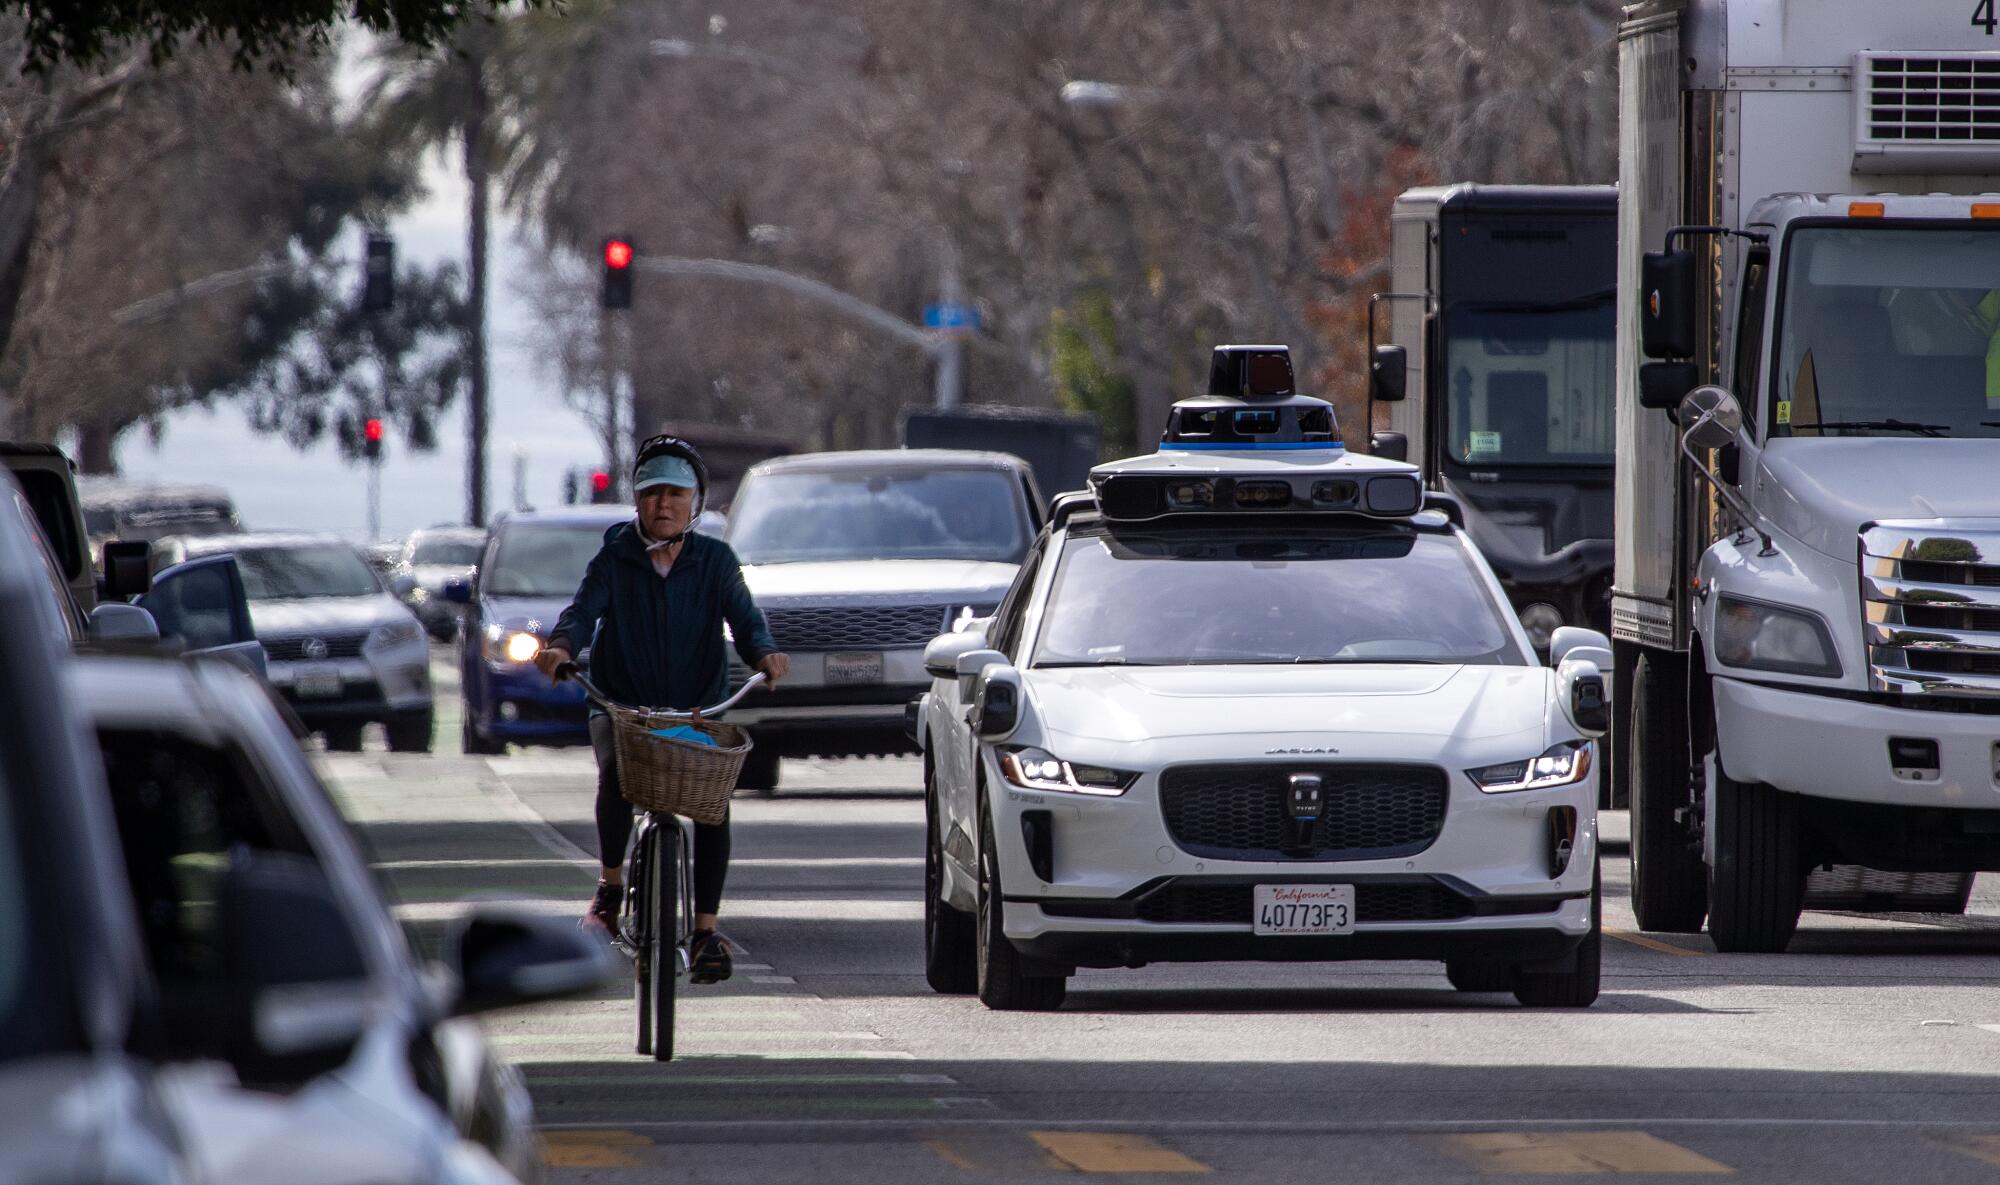 An electric Jaguar I-Pace car outfitted with Waymo full self-driving technology drives through Santa Monica on Feb. 21.